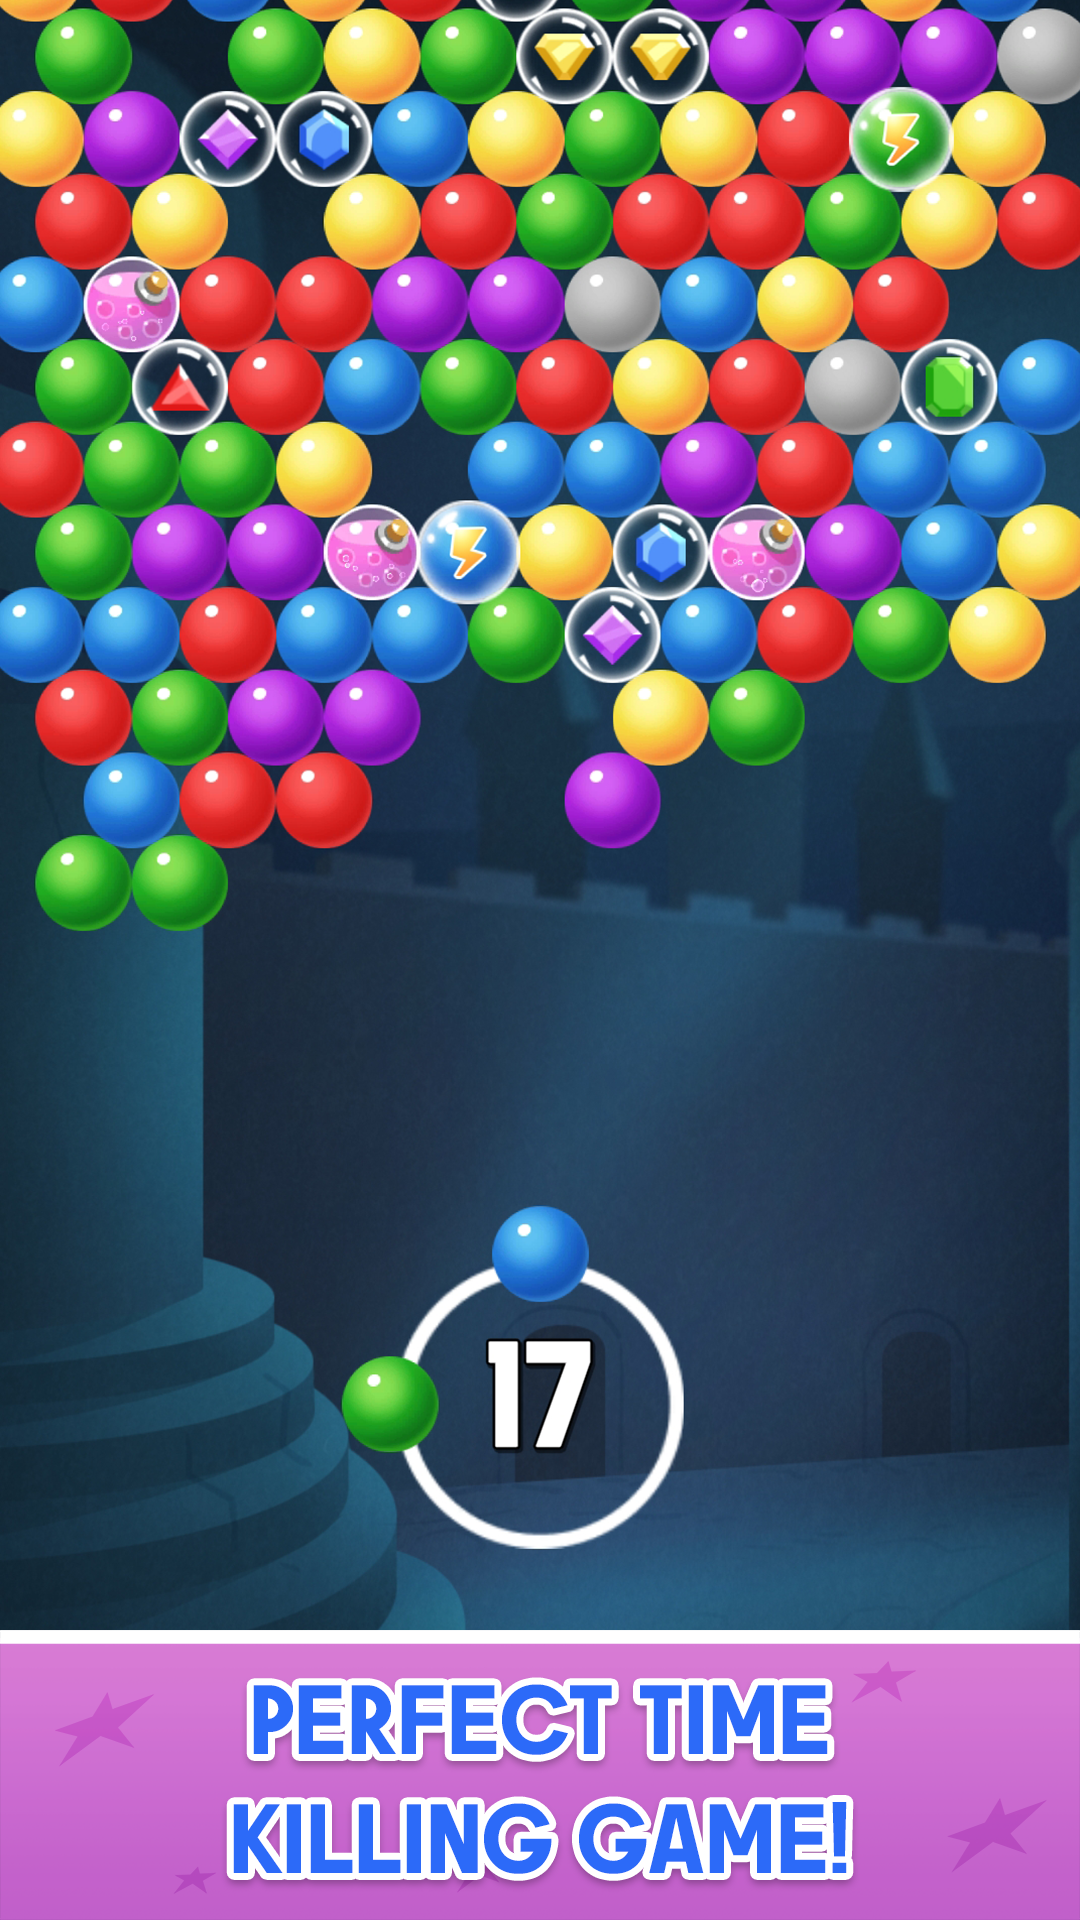 Classic Bubble Shooter New Games::Appstore for Android